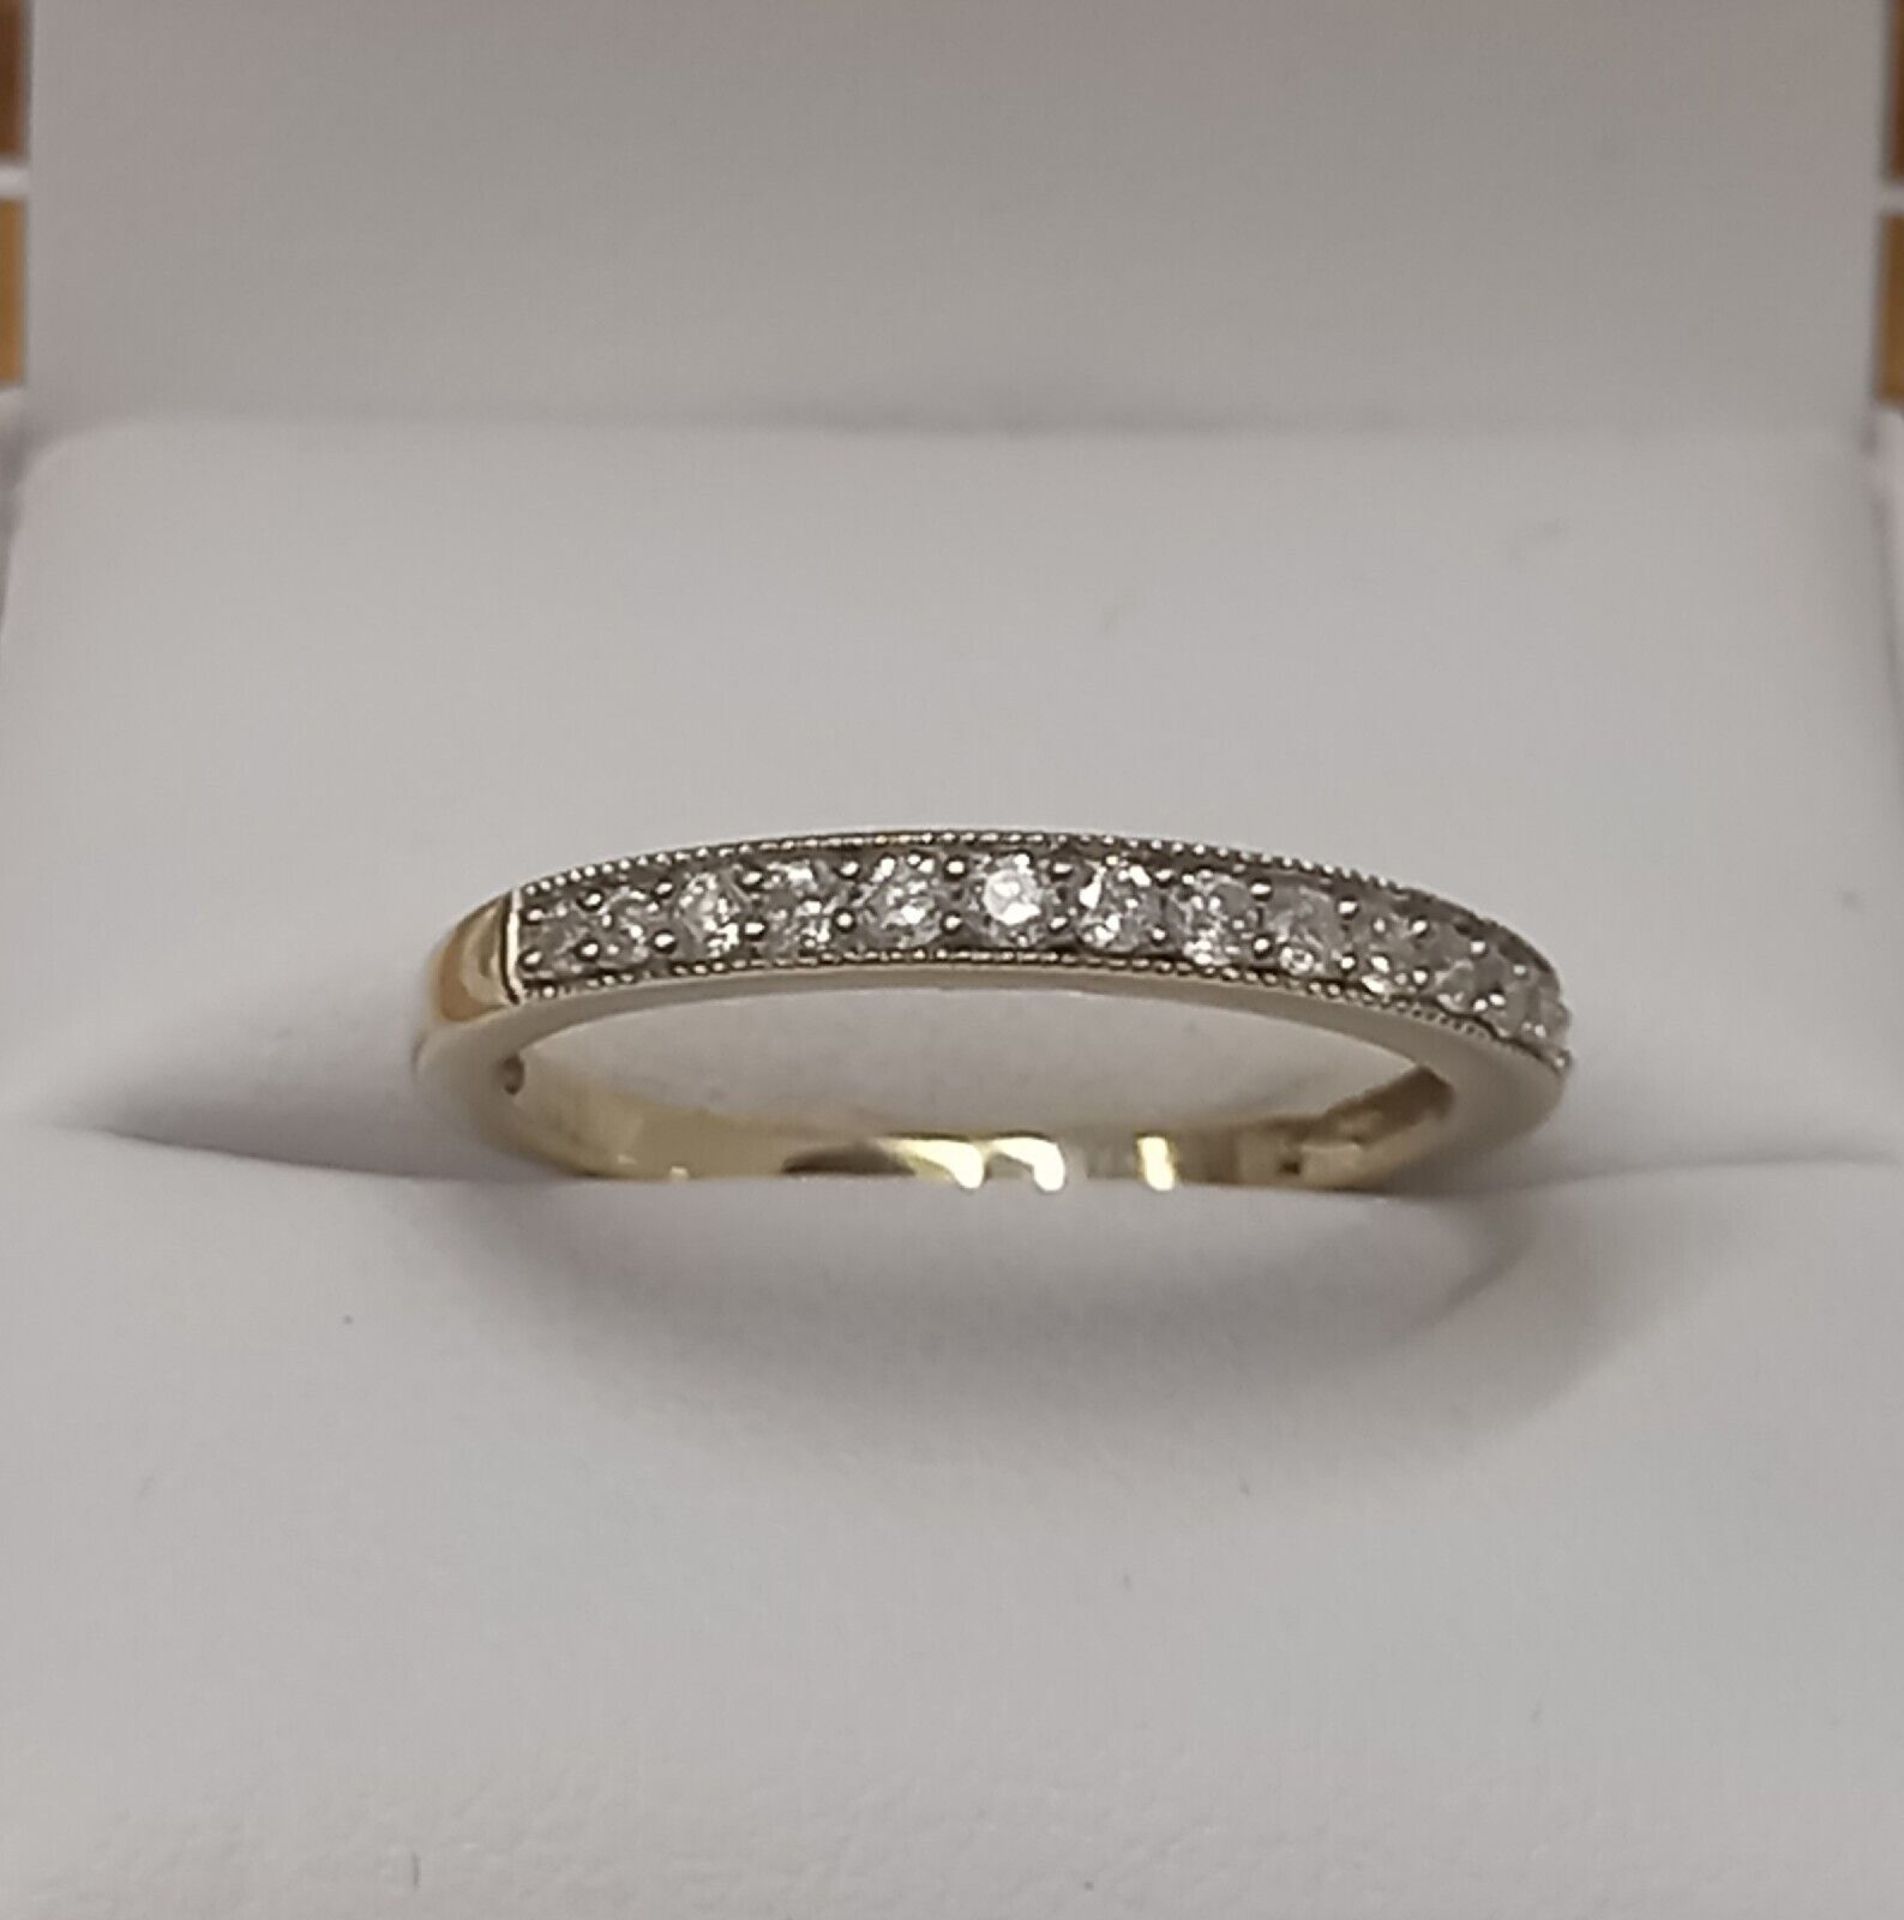 0.20CT DIAMOND ETERNITY RING/9CT YELLOW GOLD IN GIFT BOX WITH VALUATION CERTIFICATE OF £1195 - Image 5 of 5